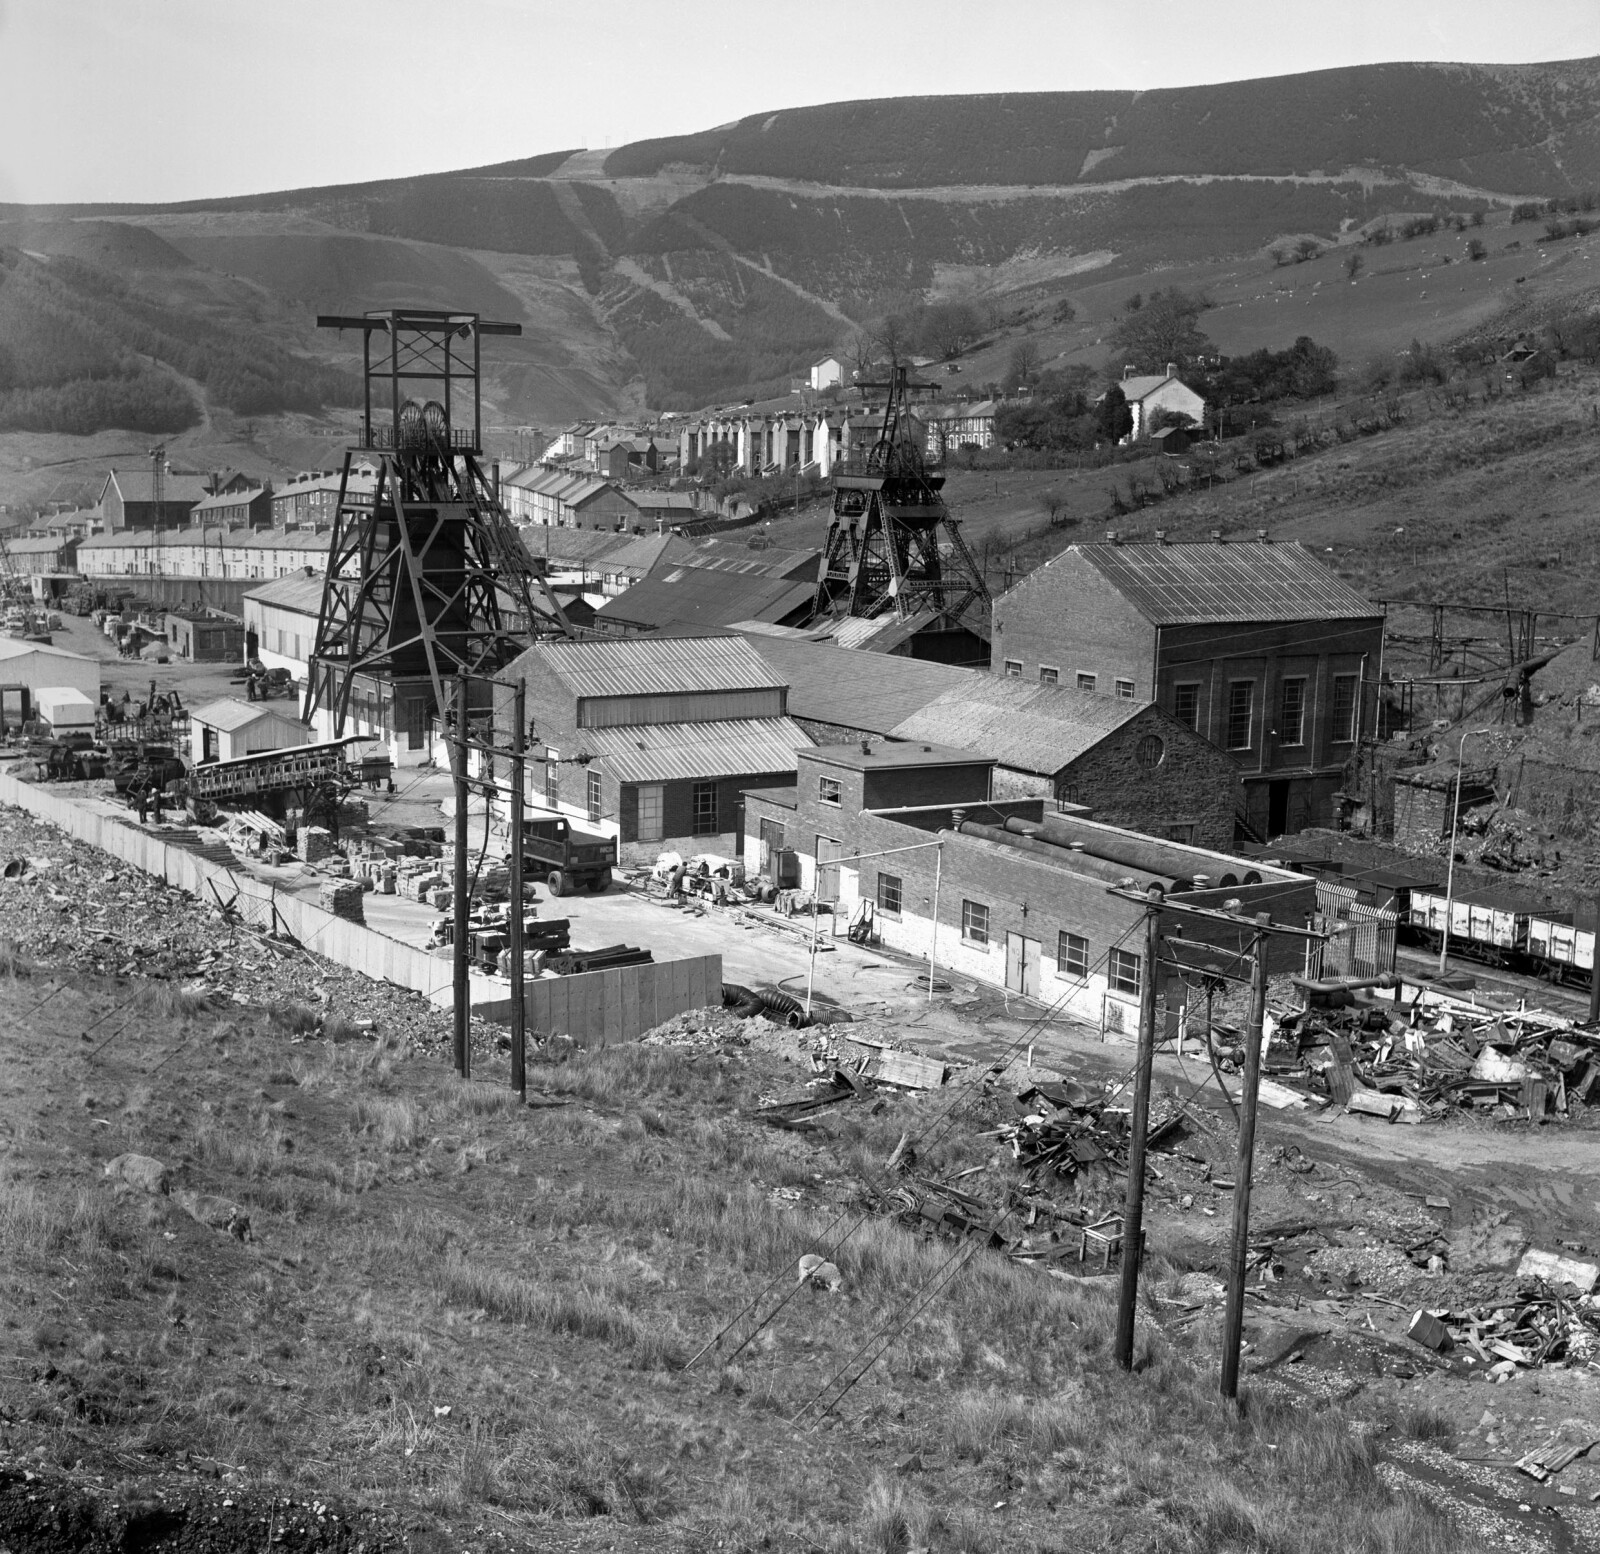 Garw Colliery in 1977, with village in the background.